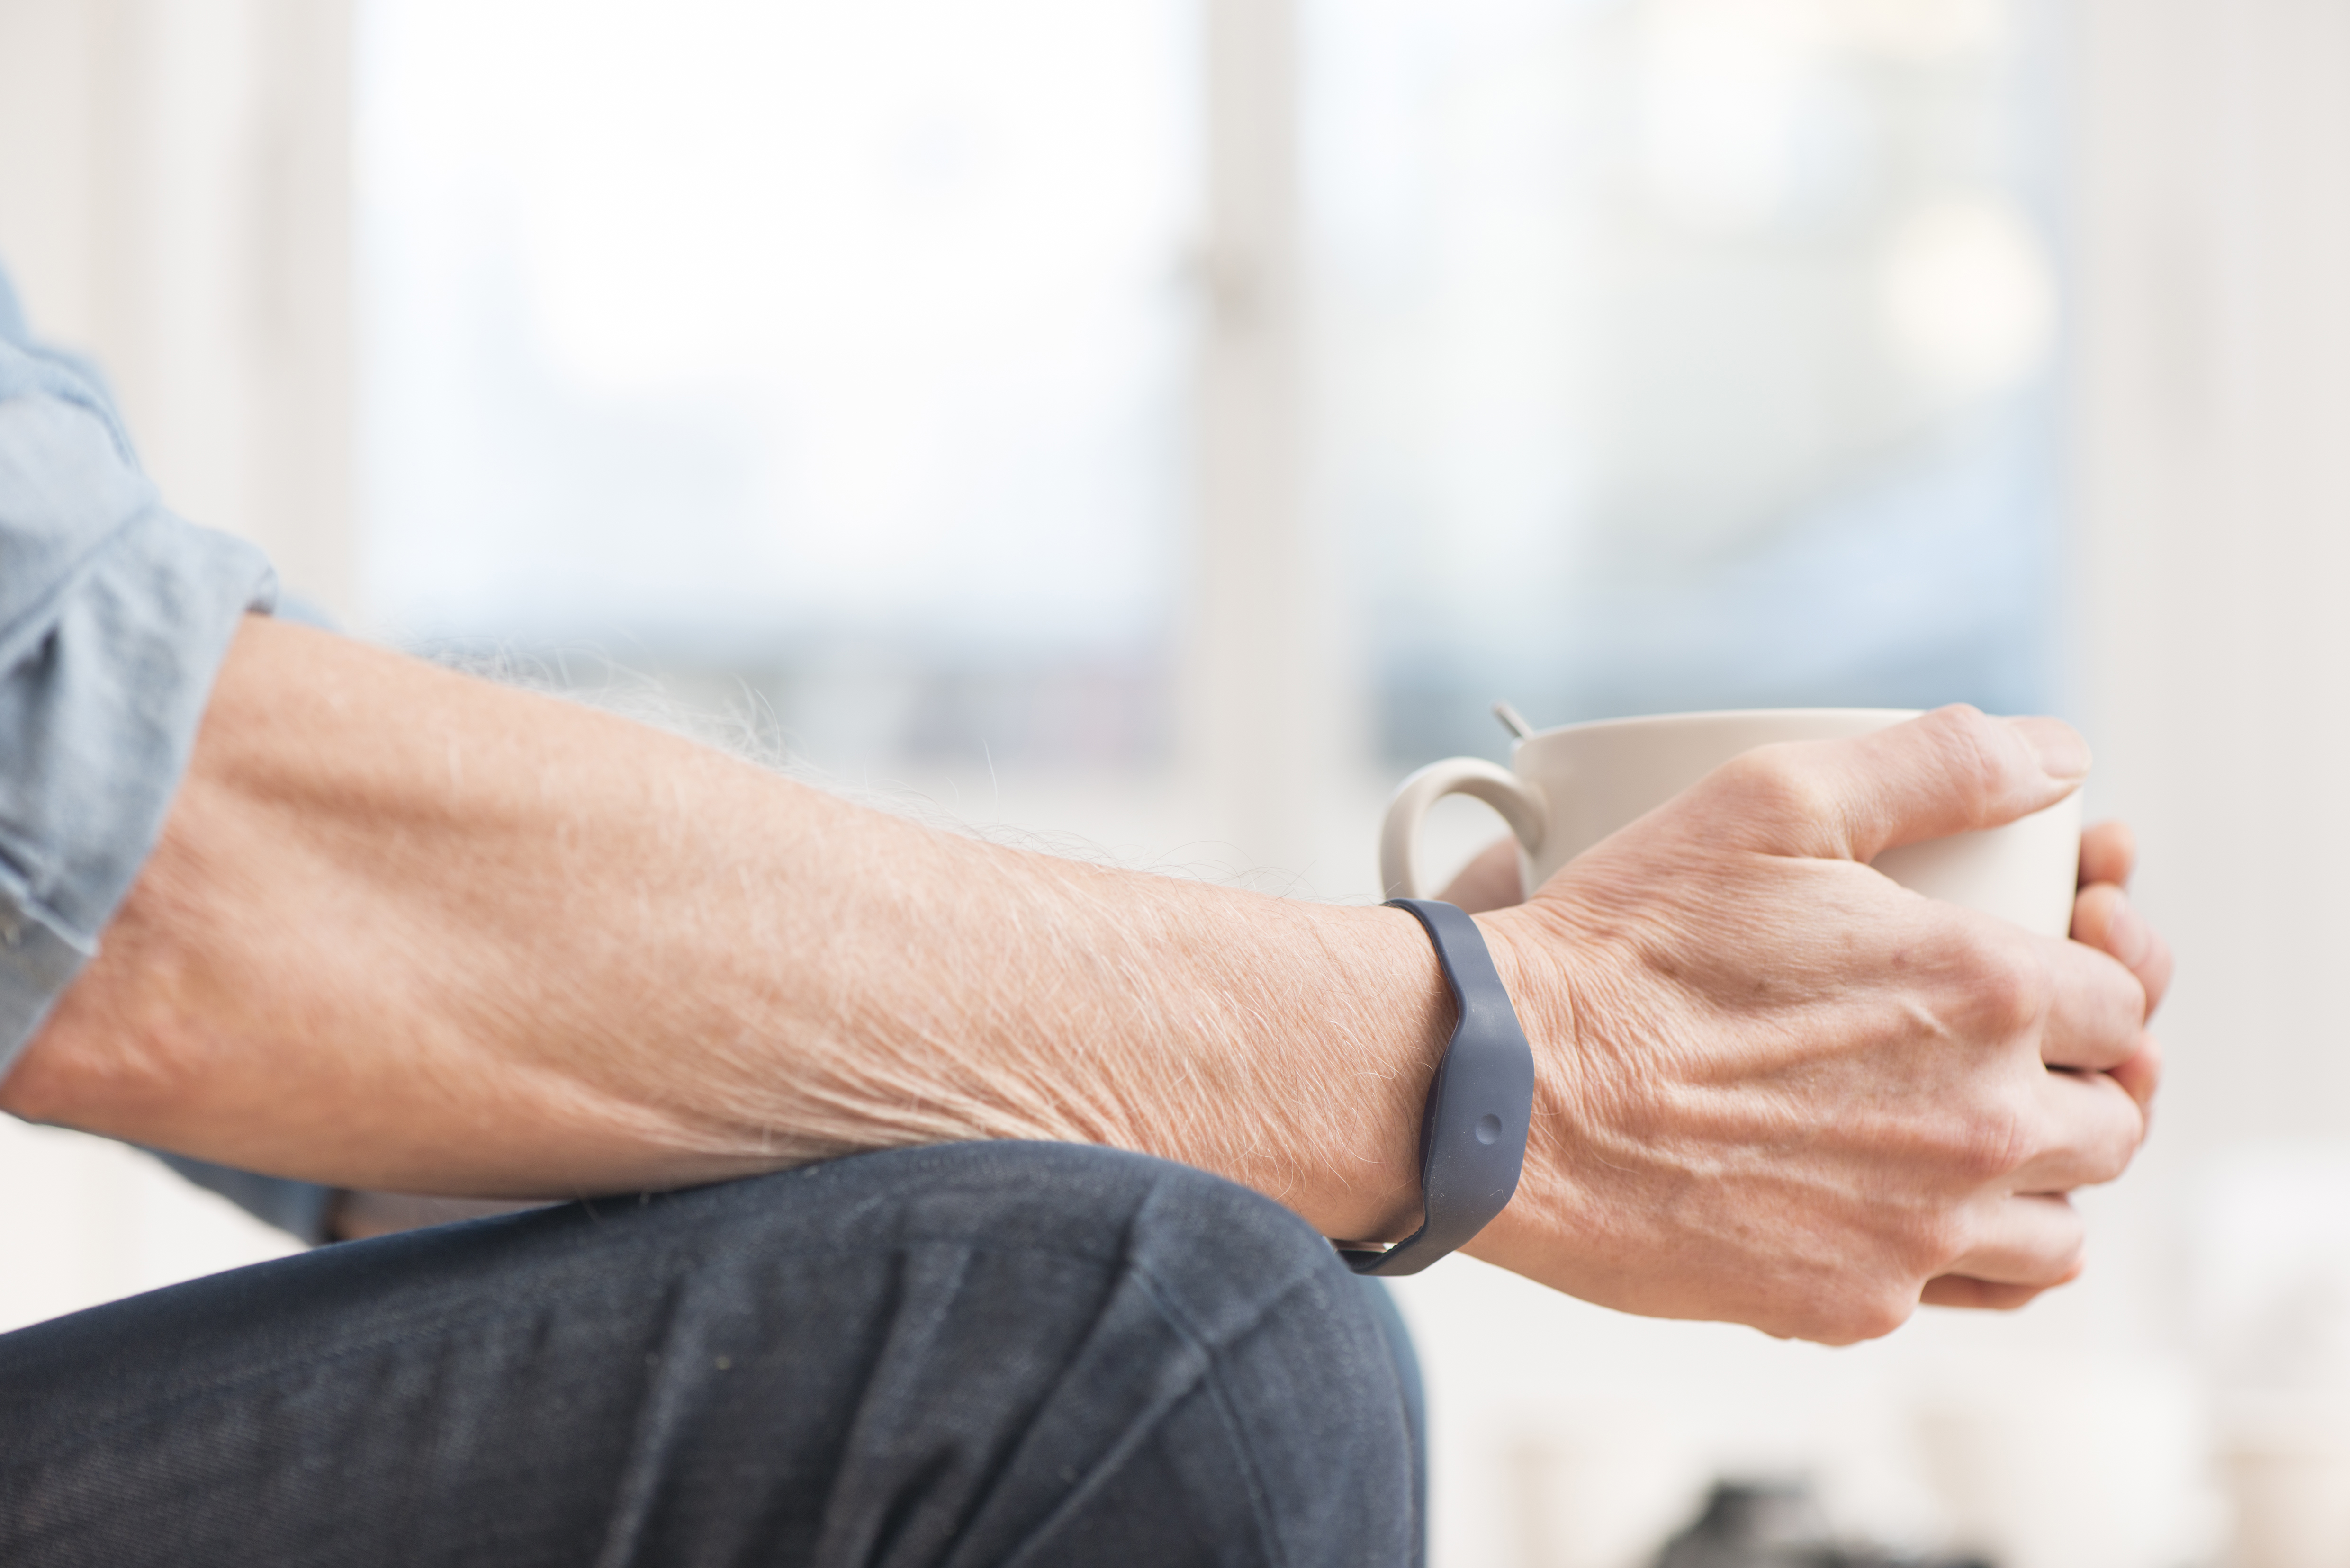 Aifloo, a Swedish startup that sells a ‘smart wristband’ to help care for the elderly, raises €5.1M